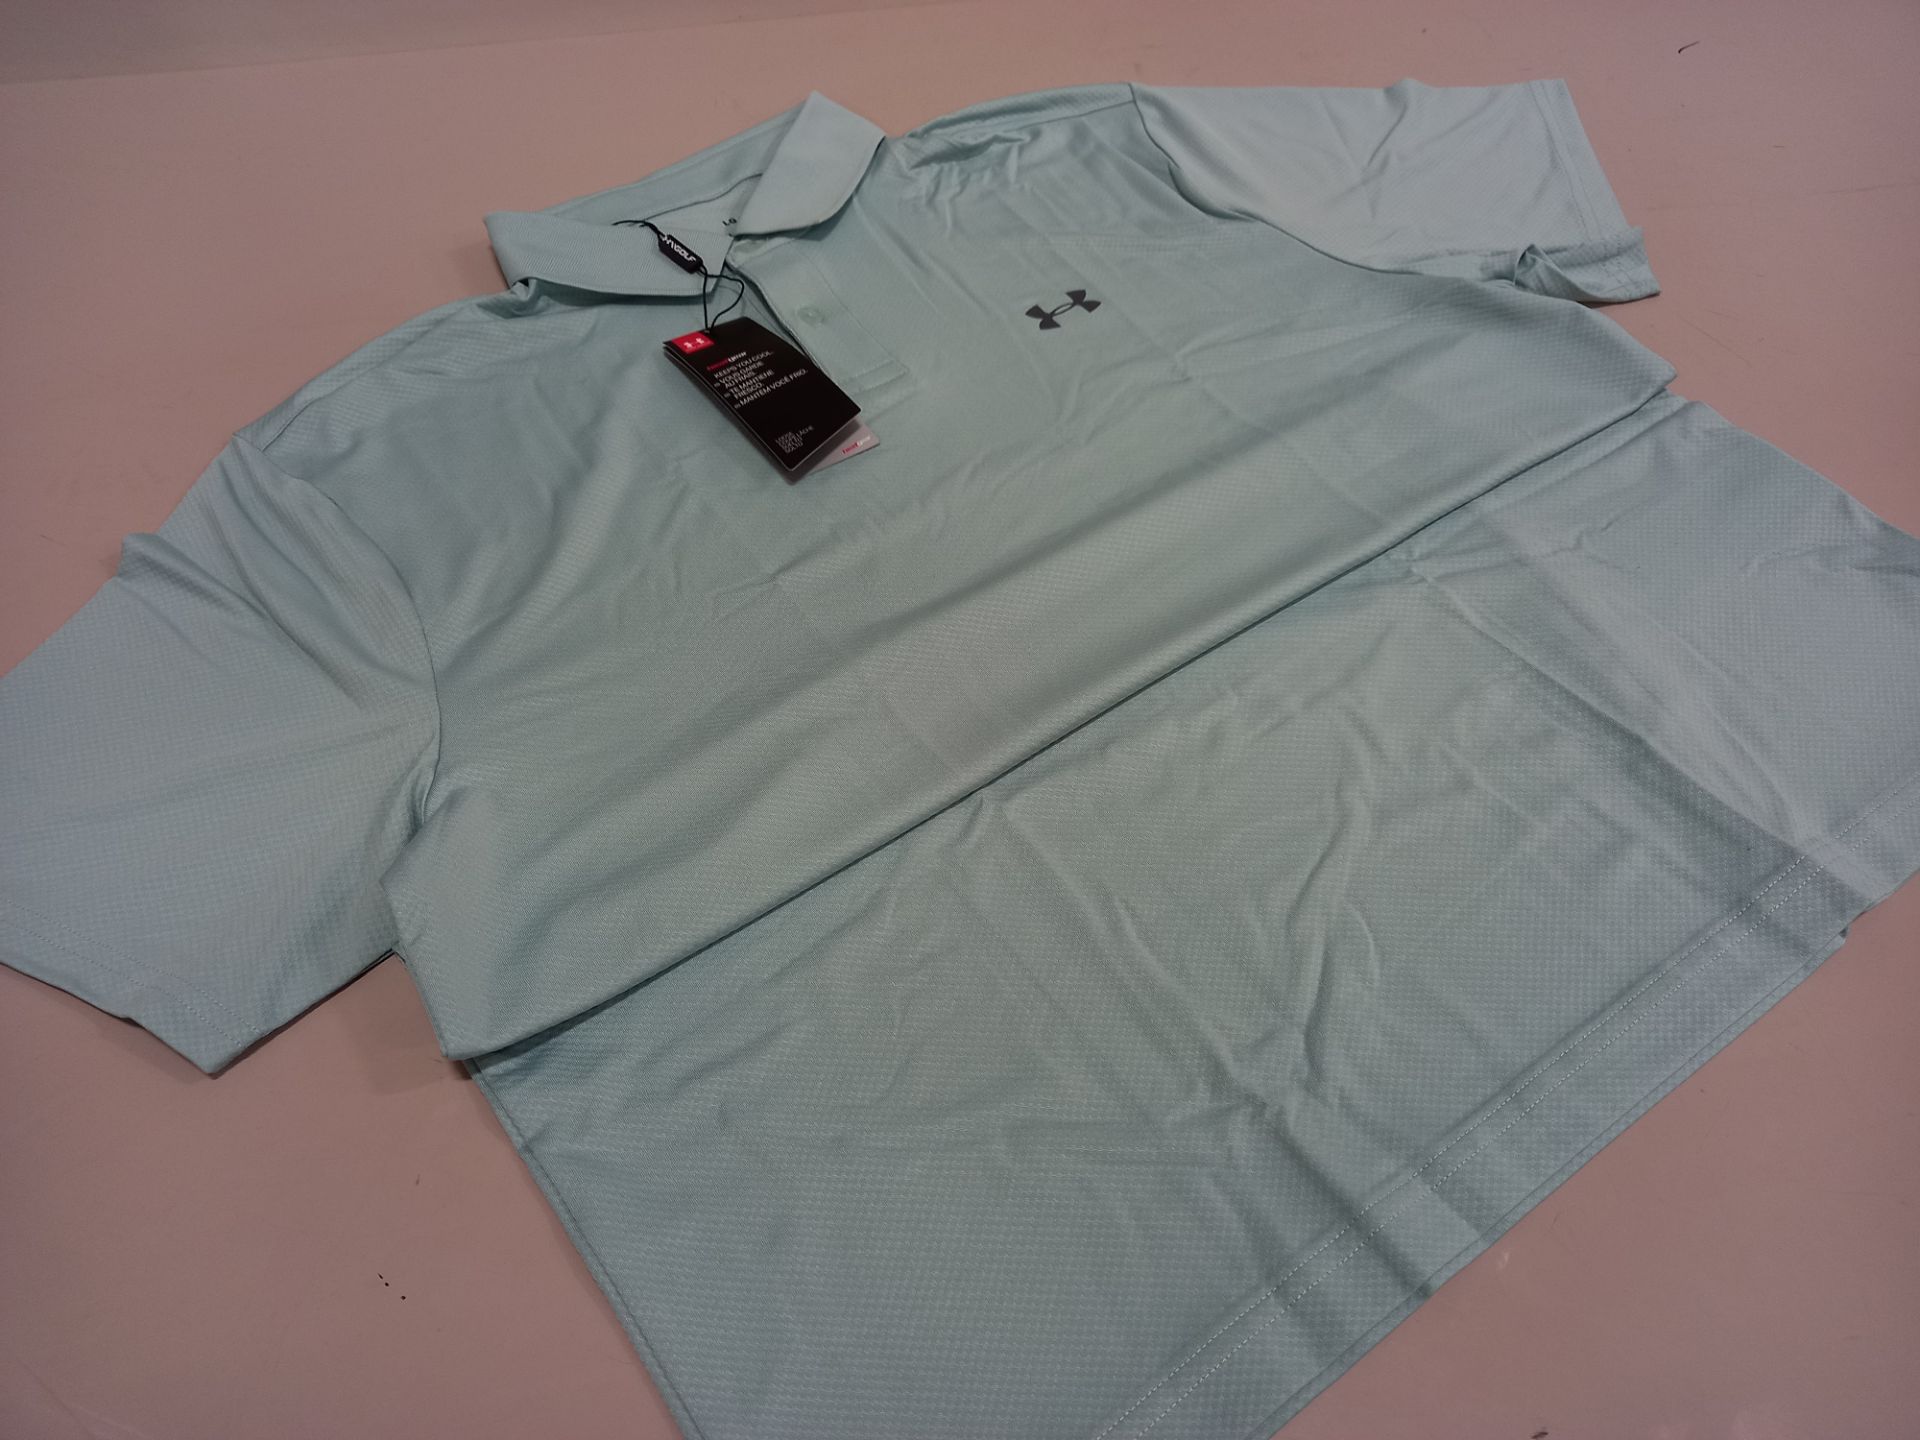 15 X BRAND NEW UNDER ARMOUR BAGGED PERFORM POLO SHIRT (VARIOUS SIZES M - 2XL) TOTAL RRP £524.85 (